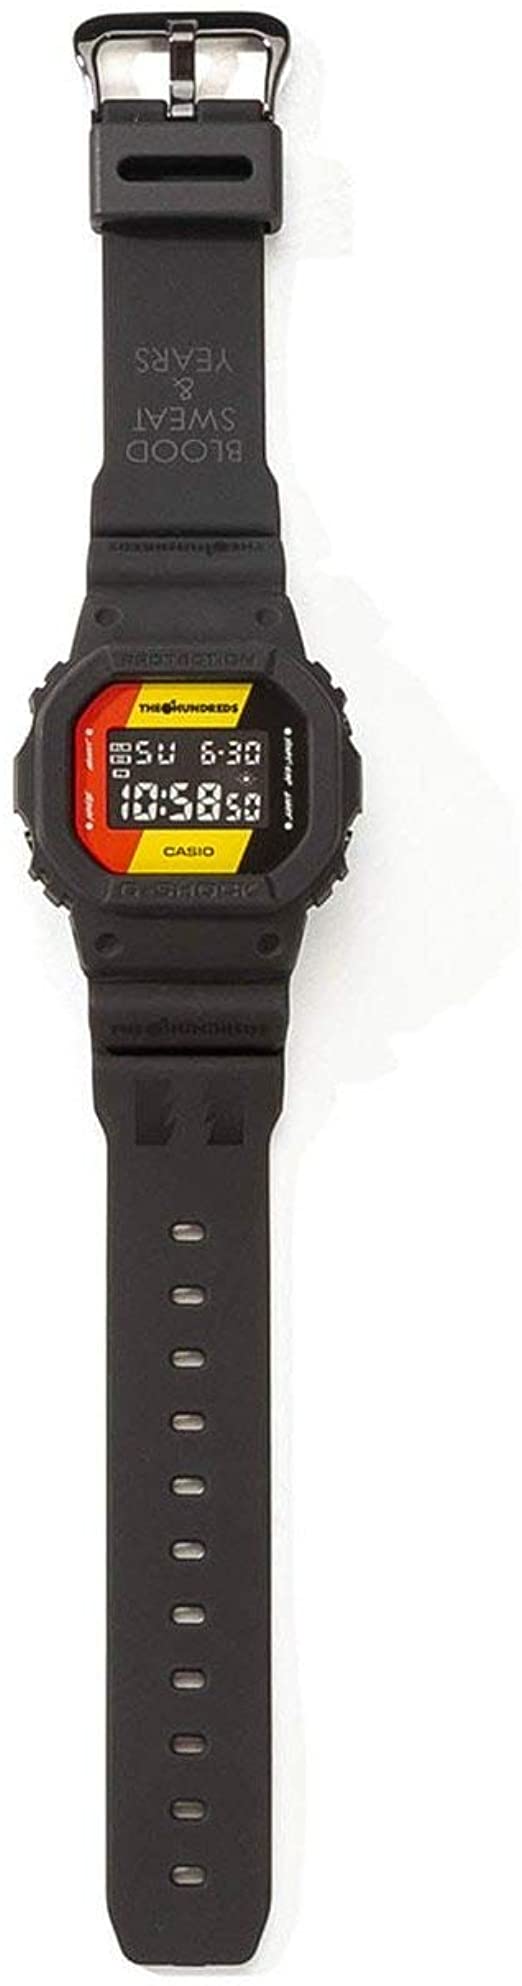 G-Shock DW5600HDR-1 The Hundreds Special Edition Black Resin Strap Unisex Watches - Lexor Miami